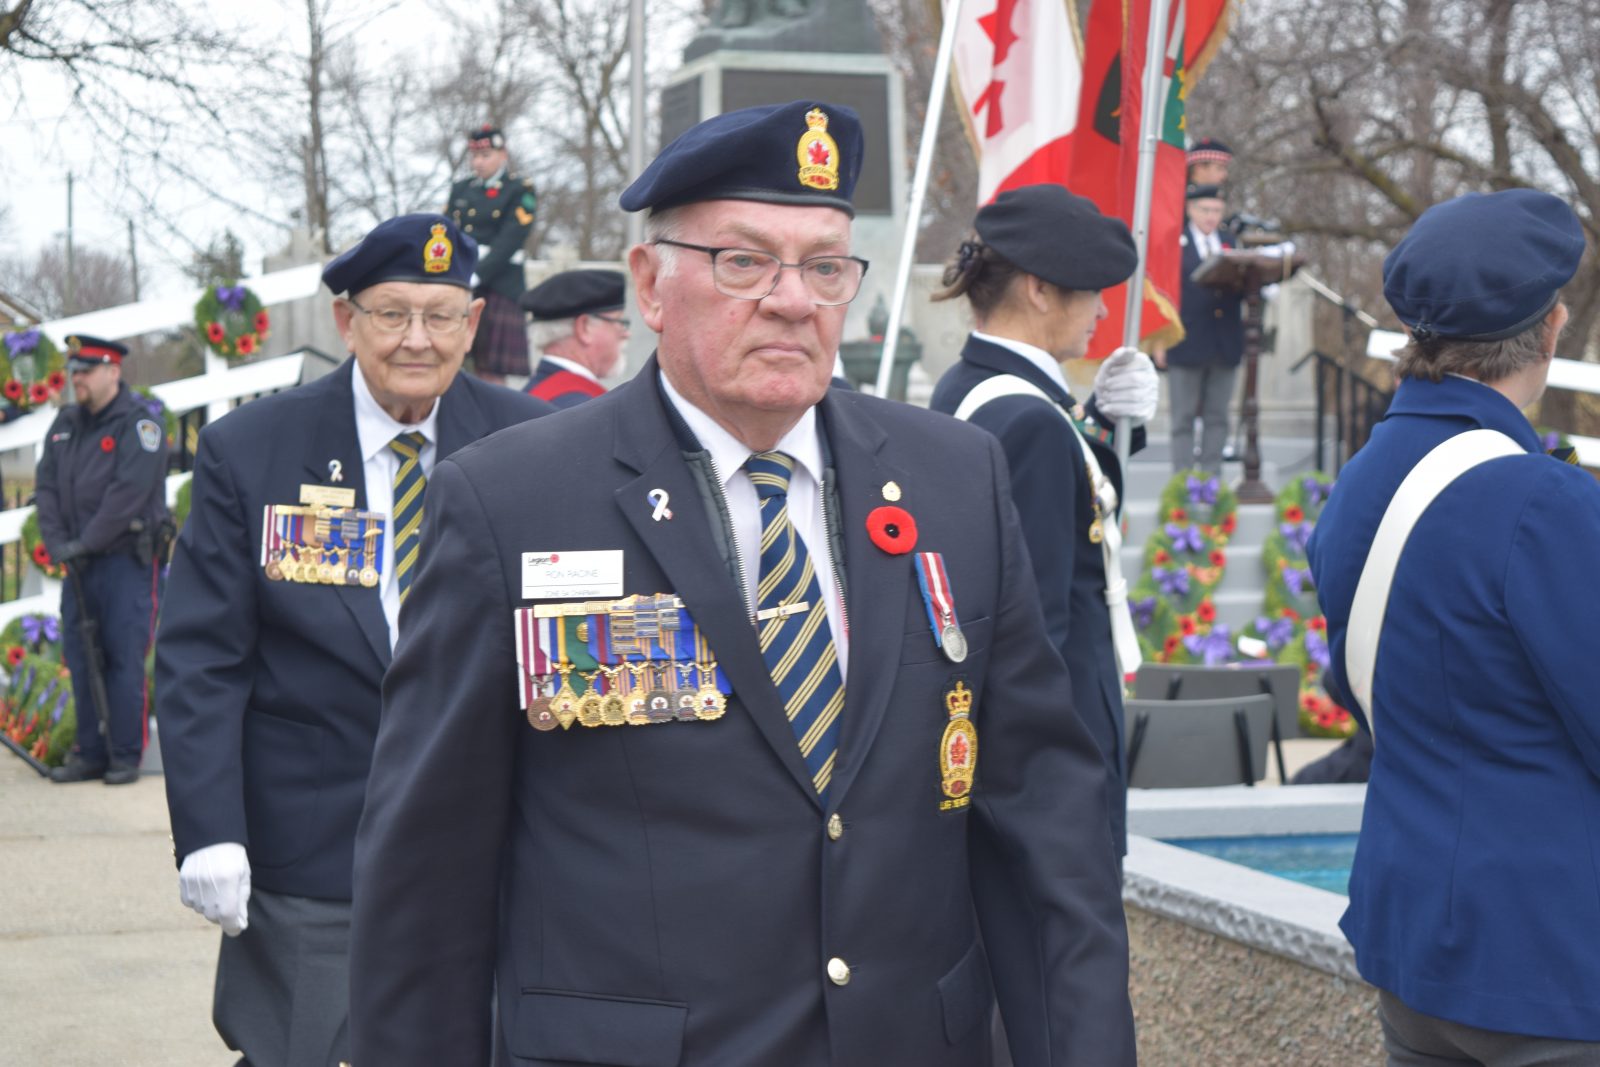 Cornwall Remembrance Day Ceremony Draws Large Crowd